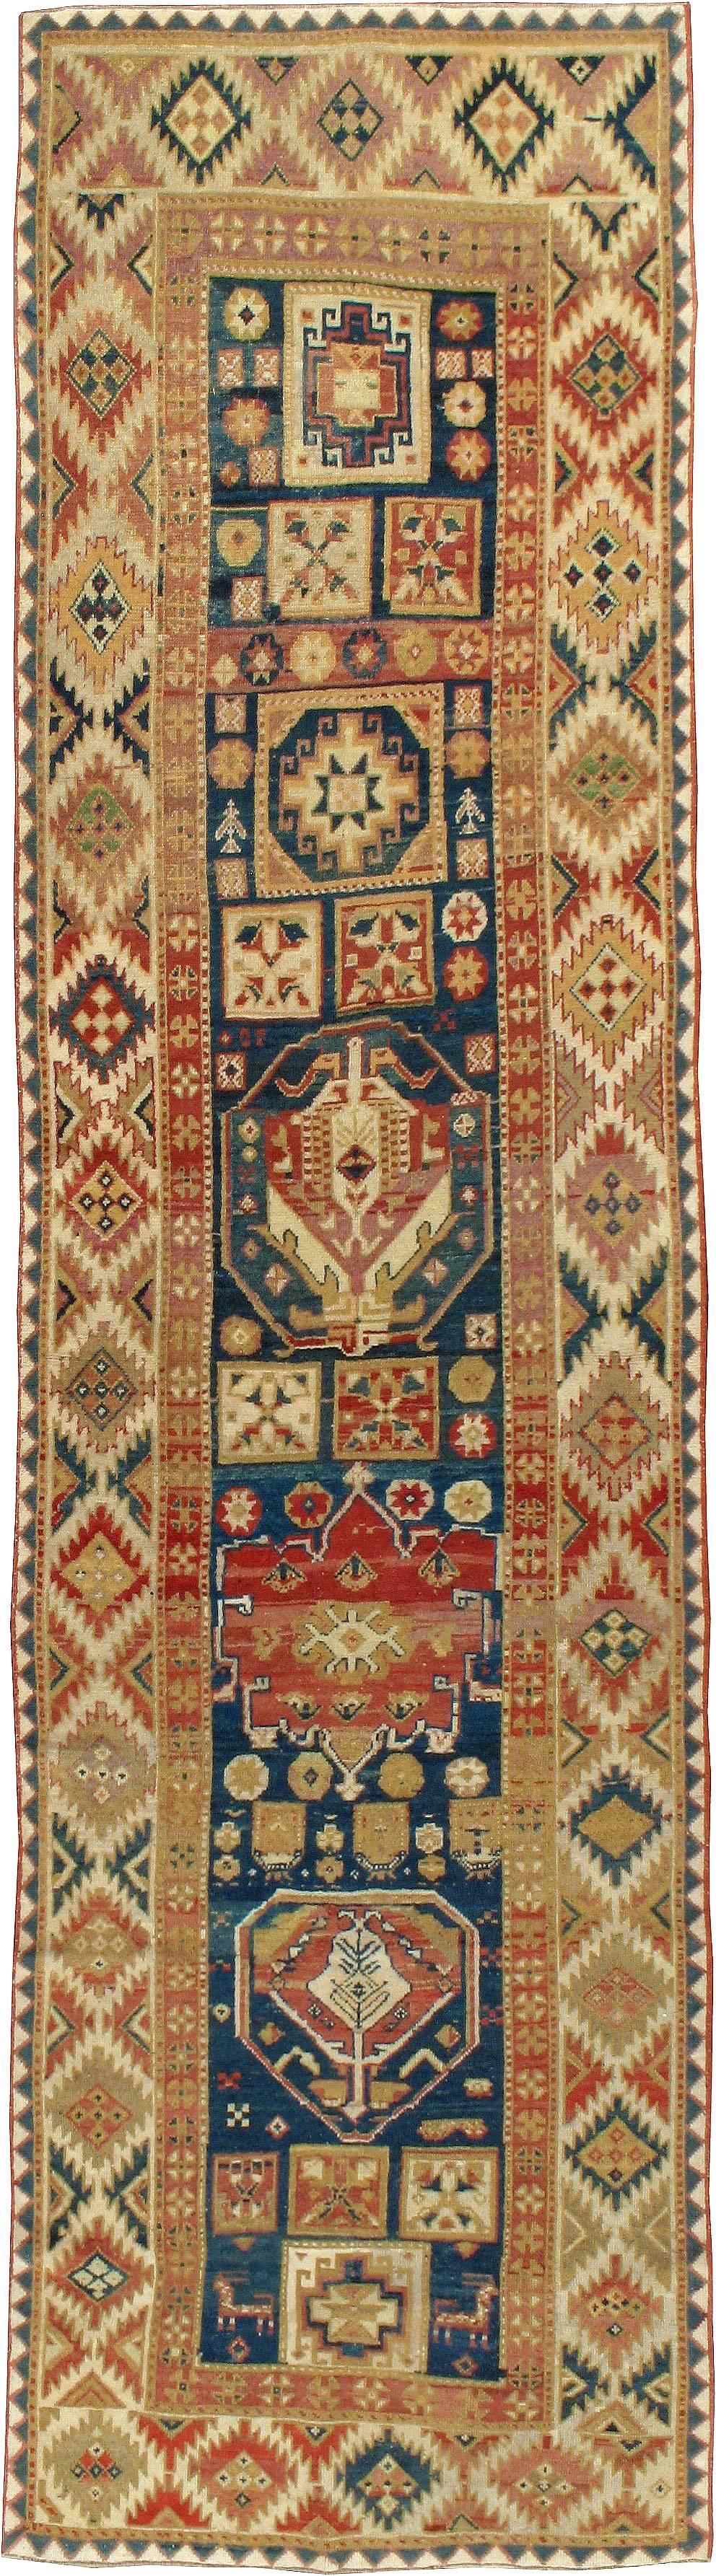 An antique North West Persian rug from the turn of the 20th century.